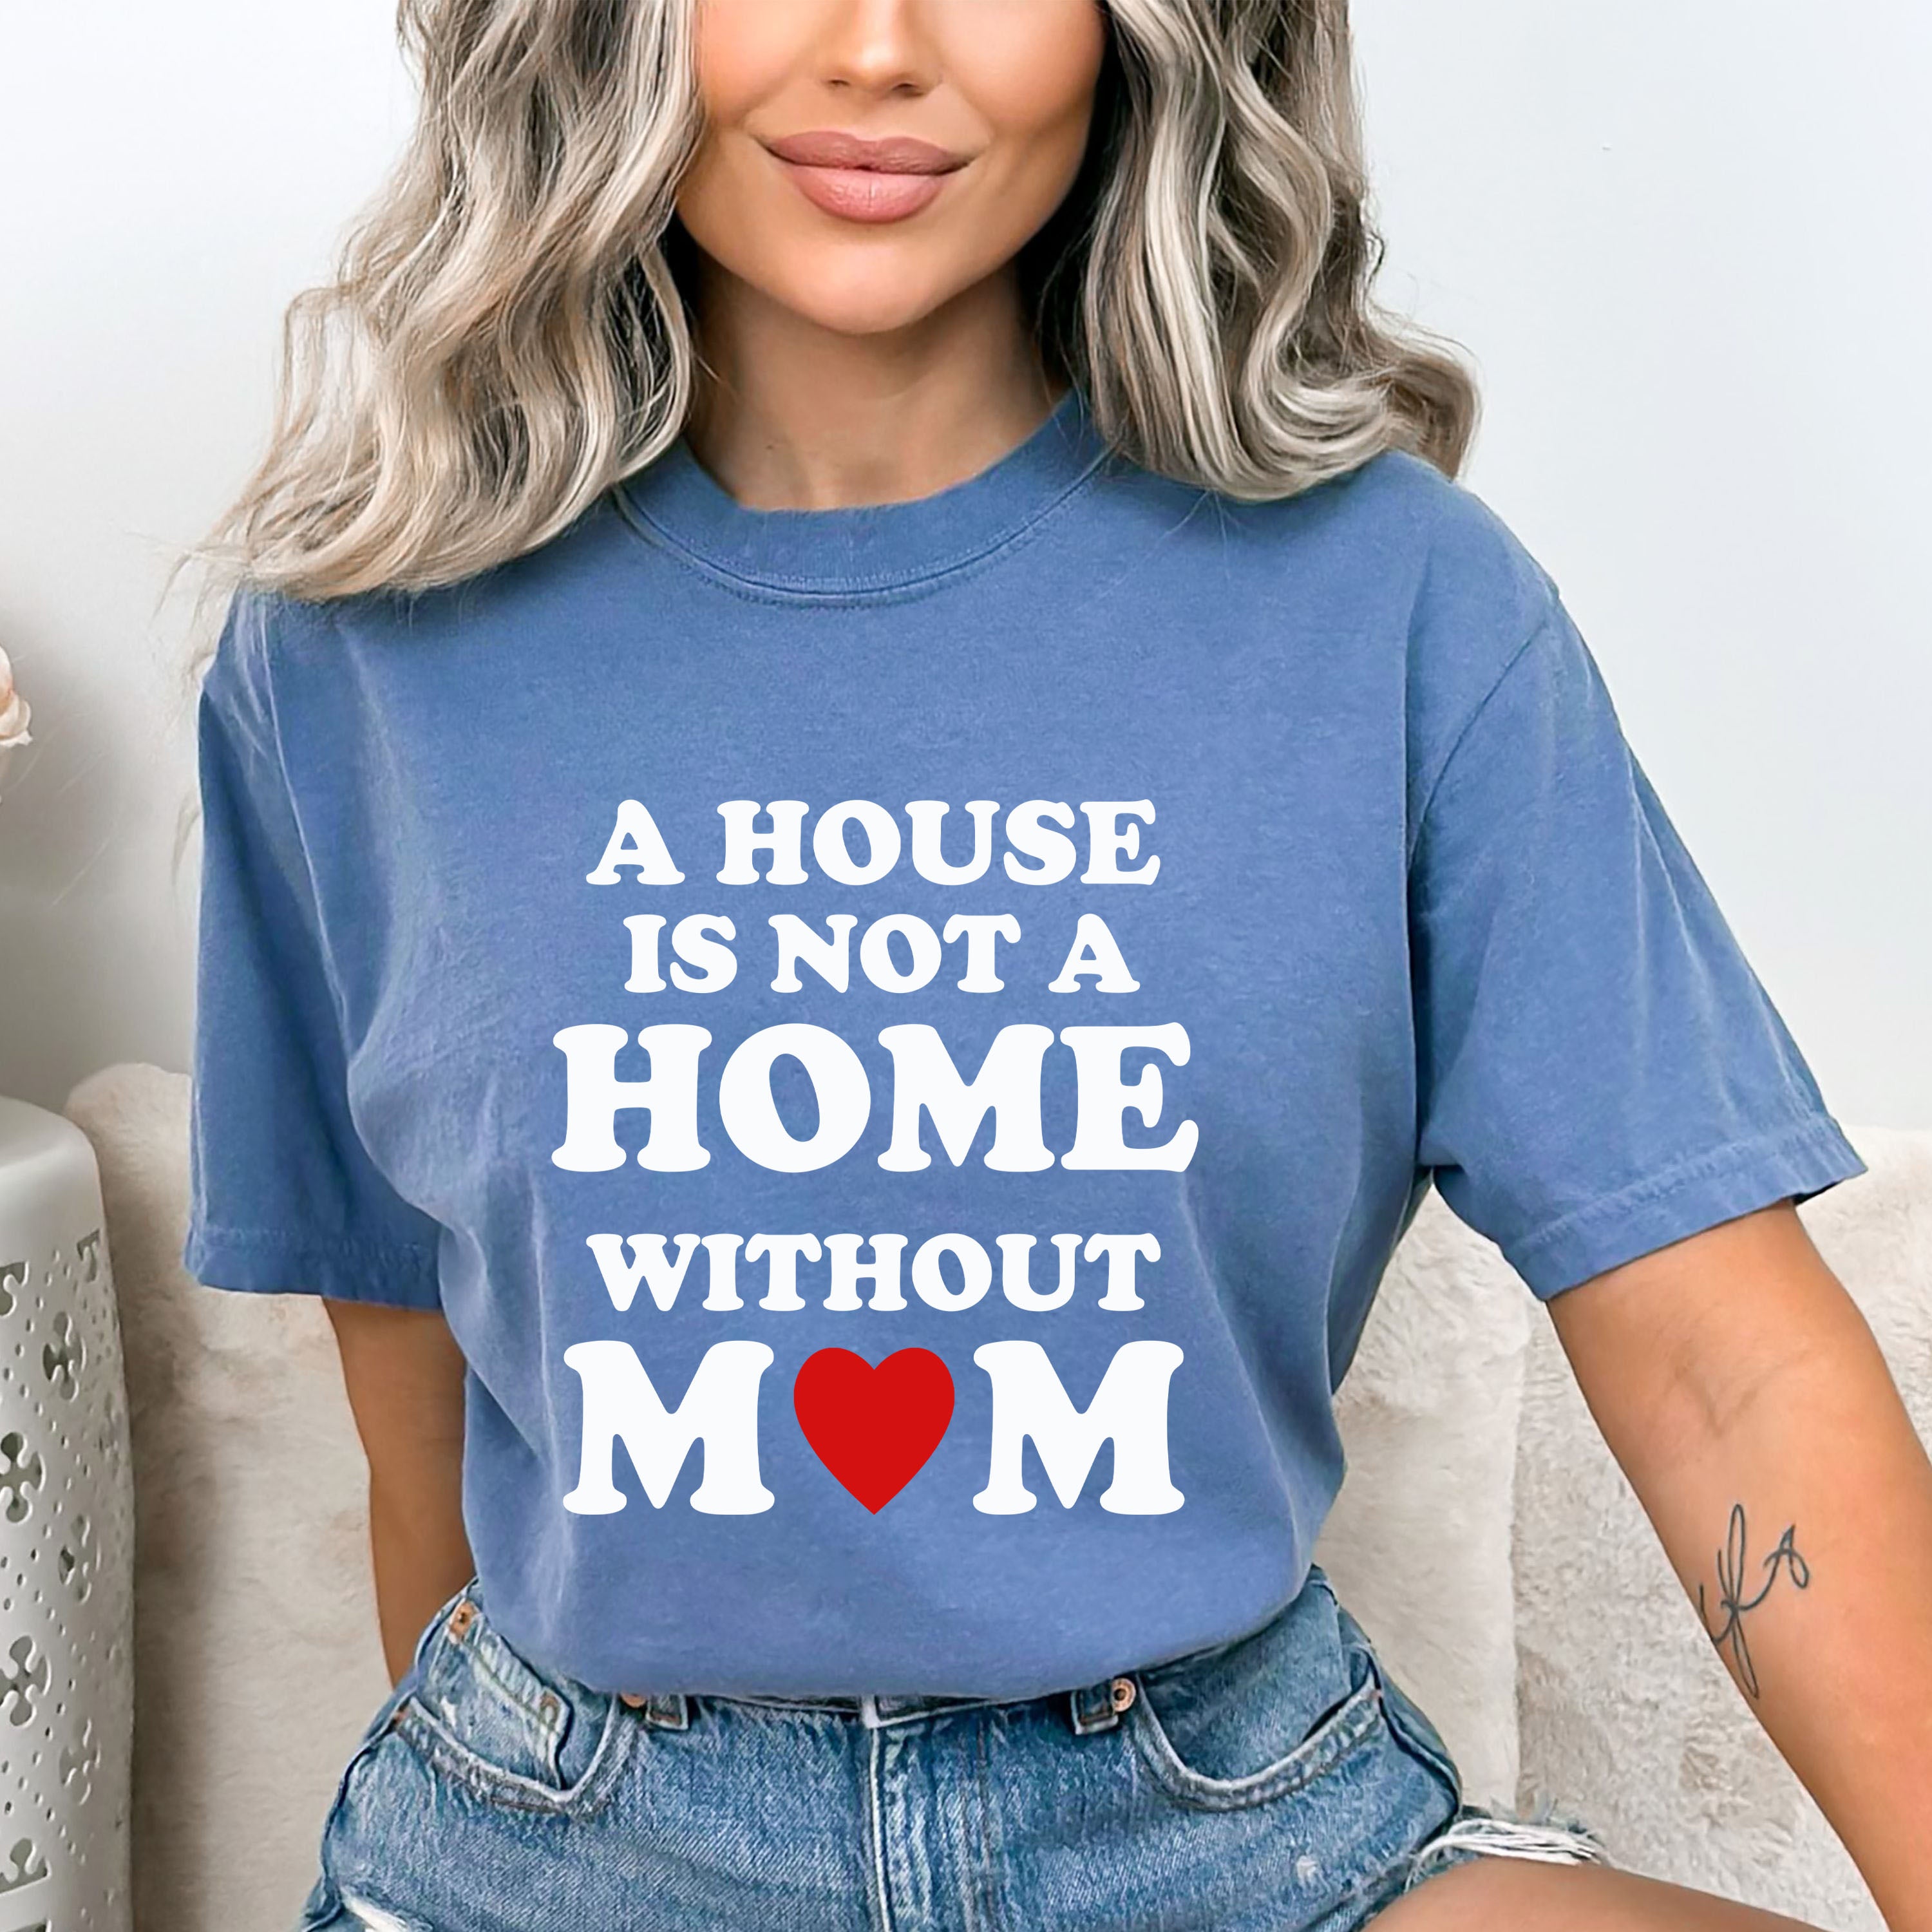 A House Is Not A Home - Bella canvas